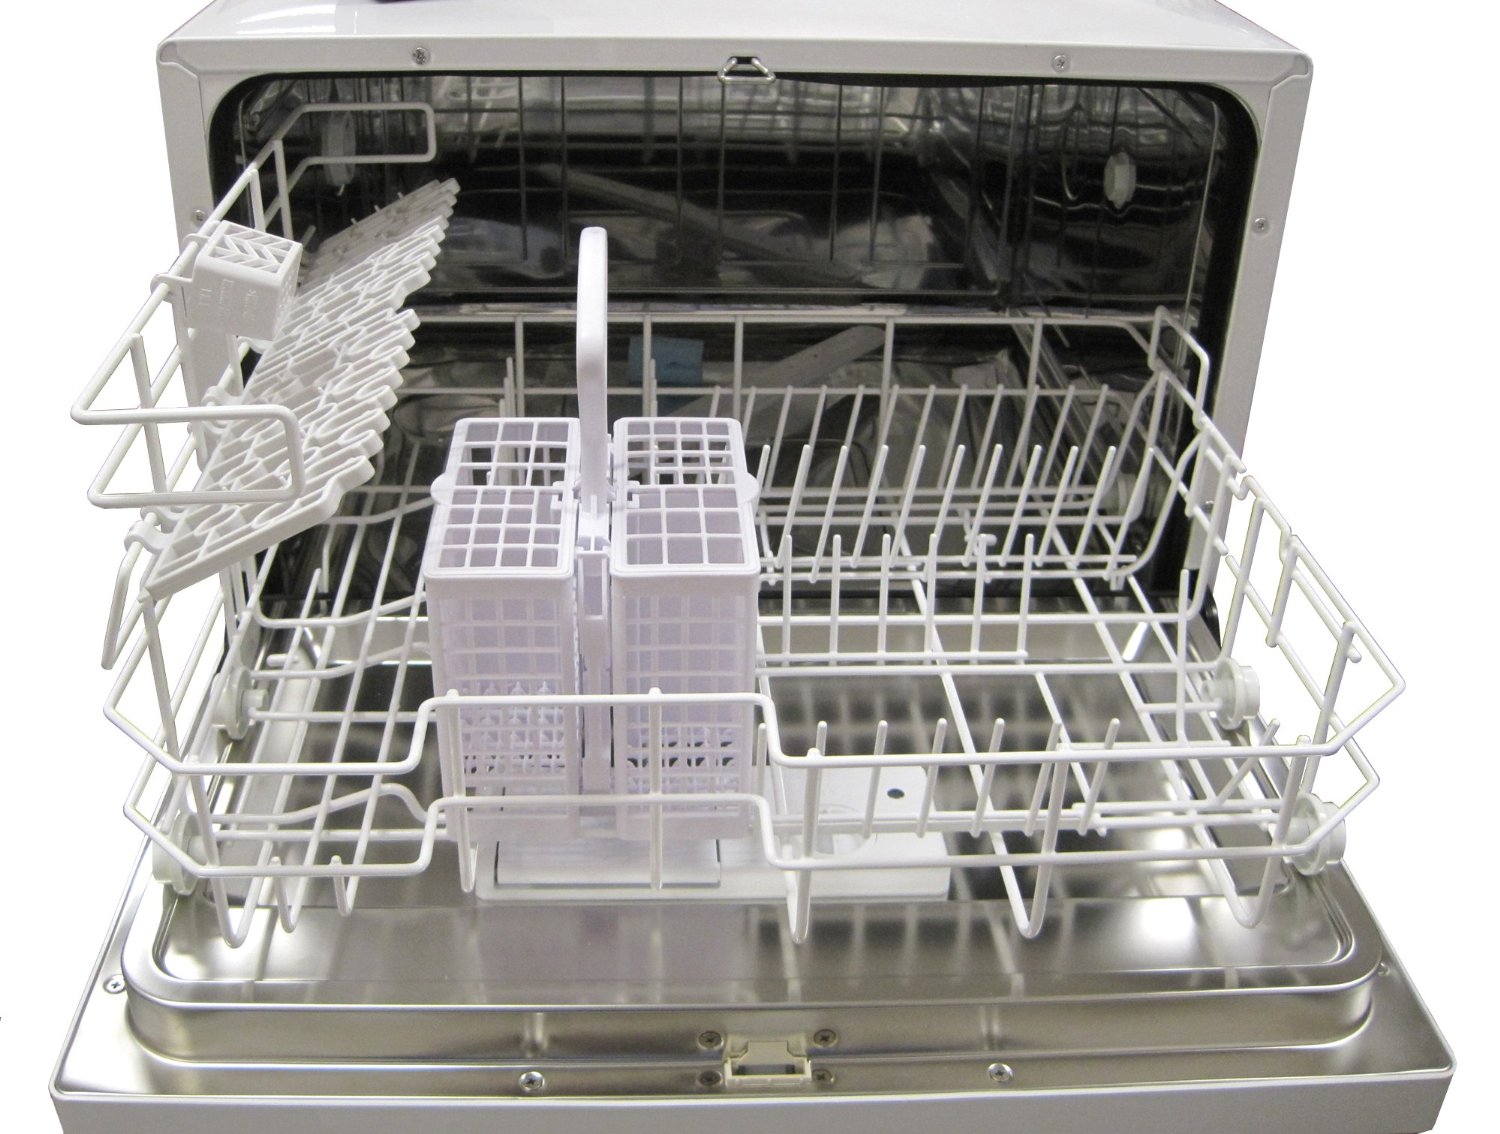 Review of SPT Countertop Dishwasher